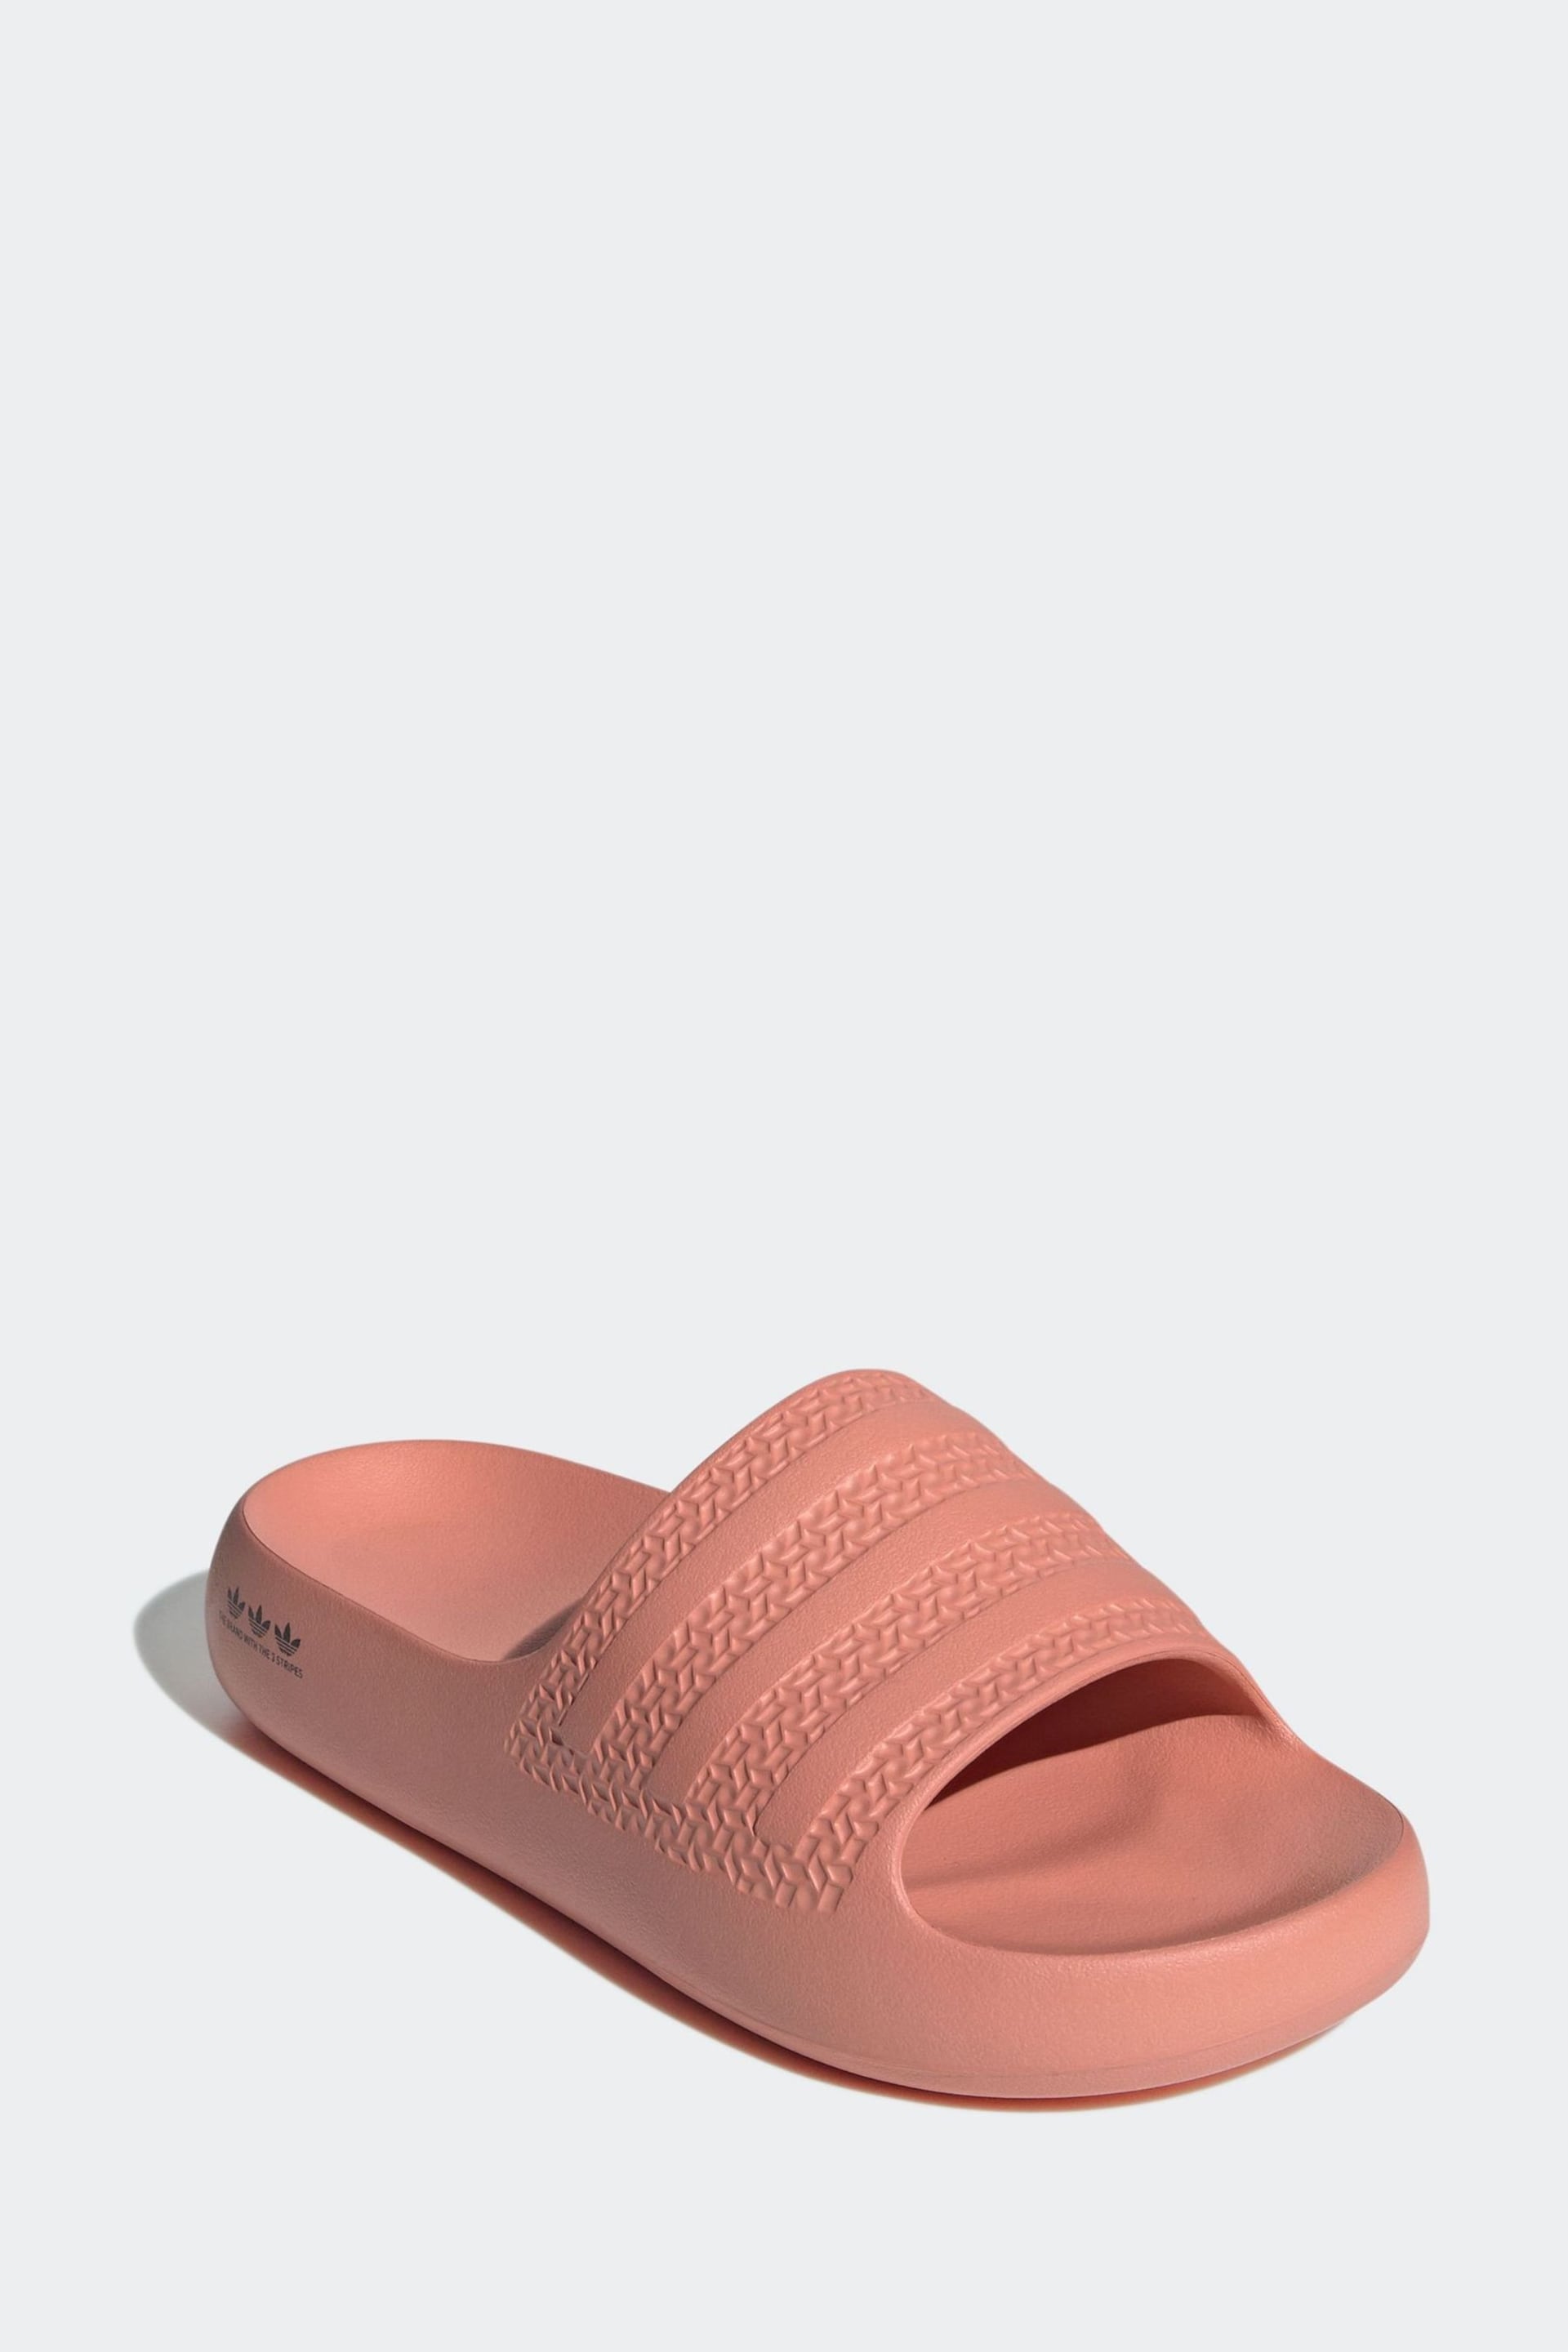 adidas Red Adilette Ayoon Sandals - Image 3 of 8